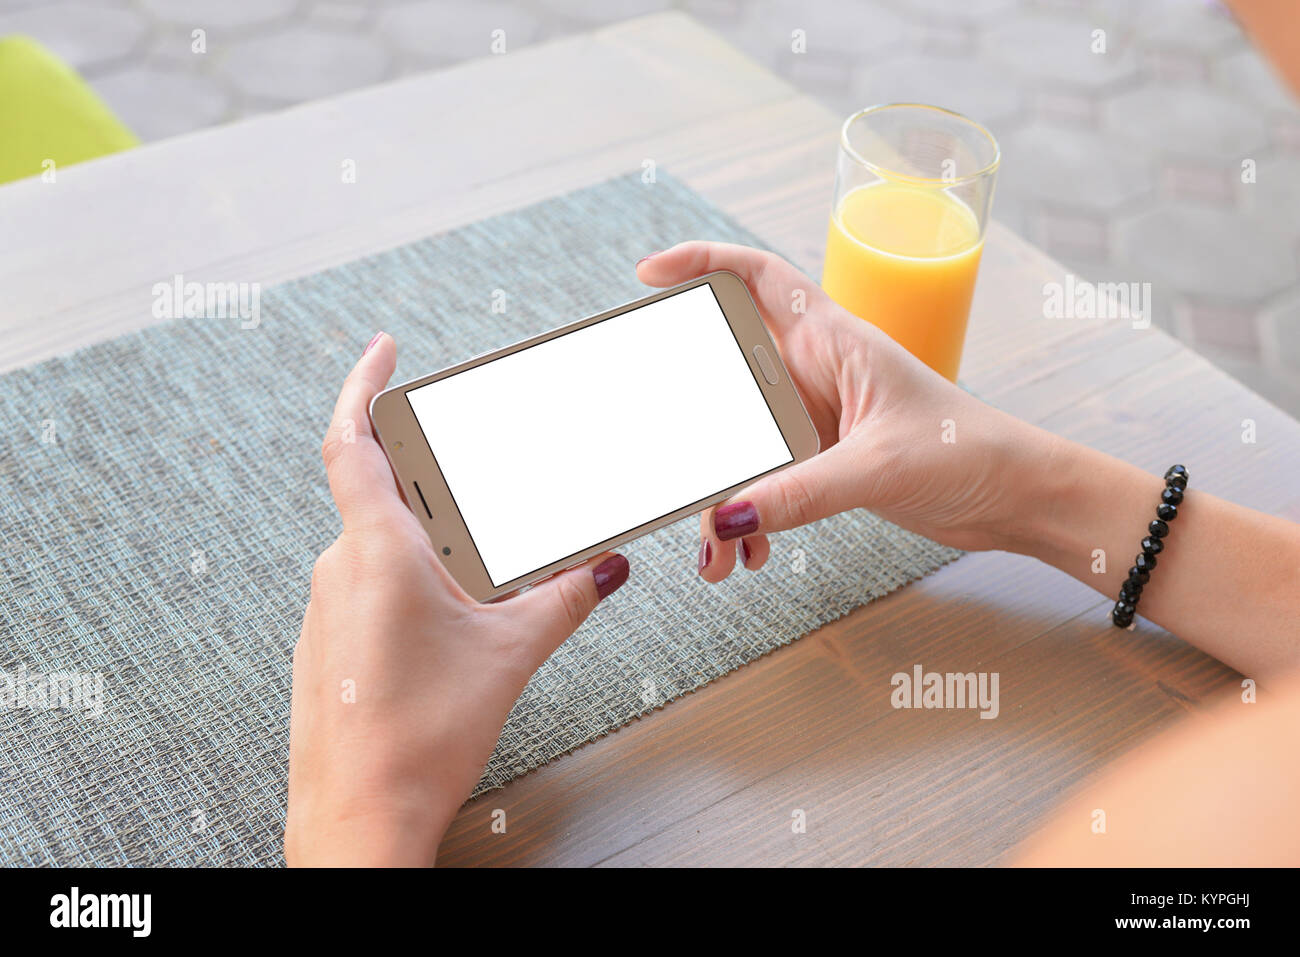 Girl watching video or play game on mobile phone in horizontal position. Isolated screen for app mockup, presentation. Close-up. Stock Photo